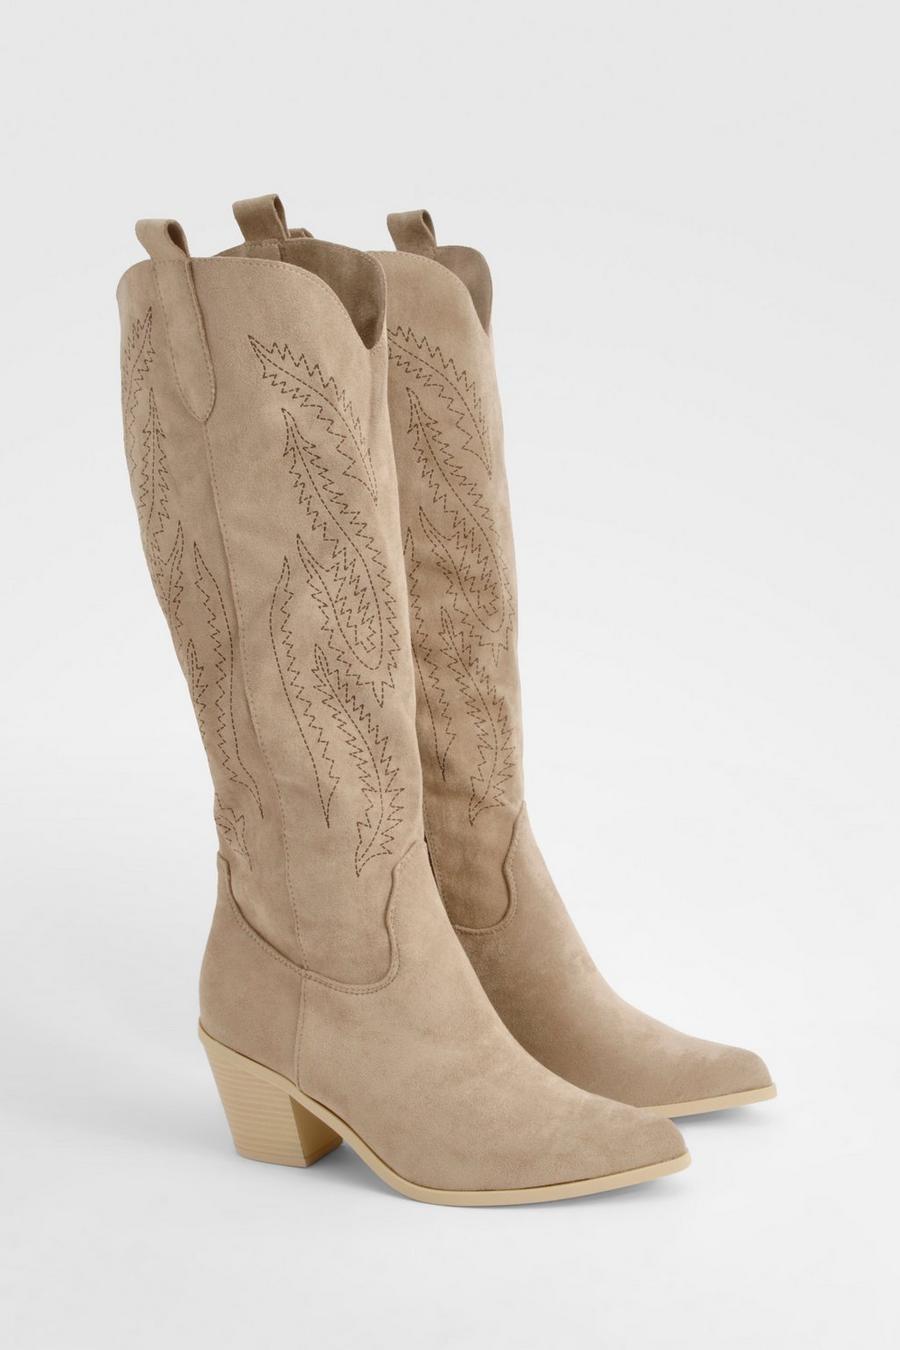 Taupe Embroidered Calf High Western Boots 